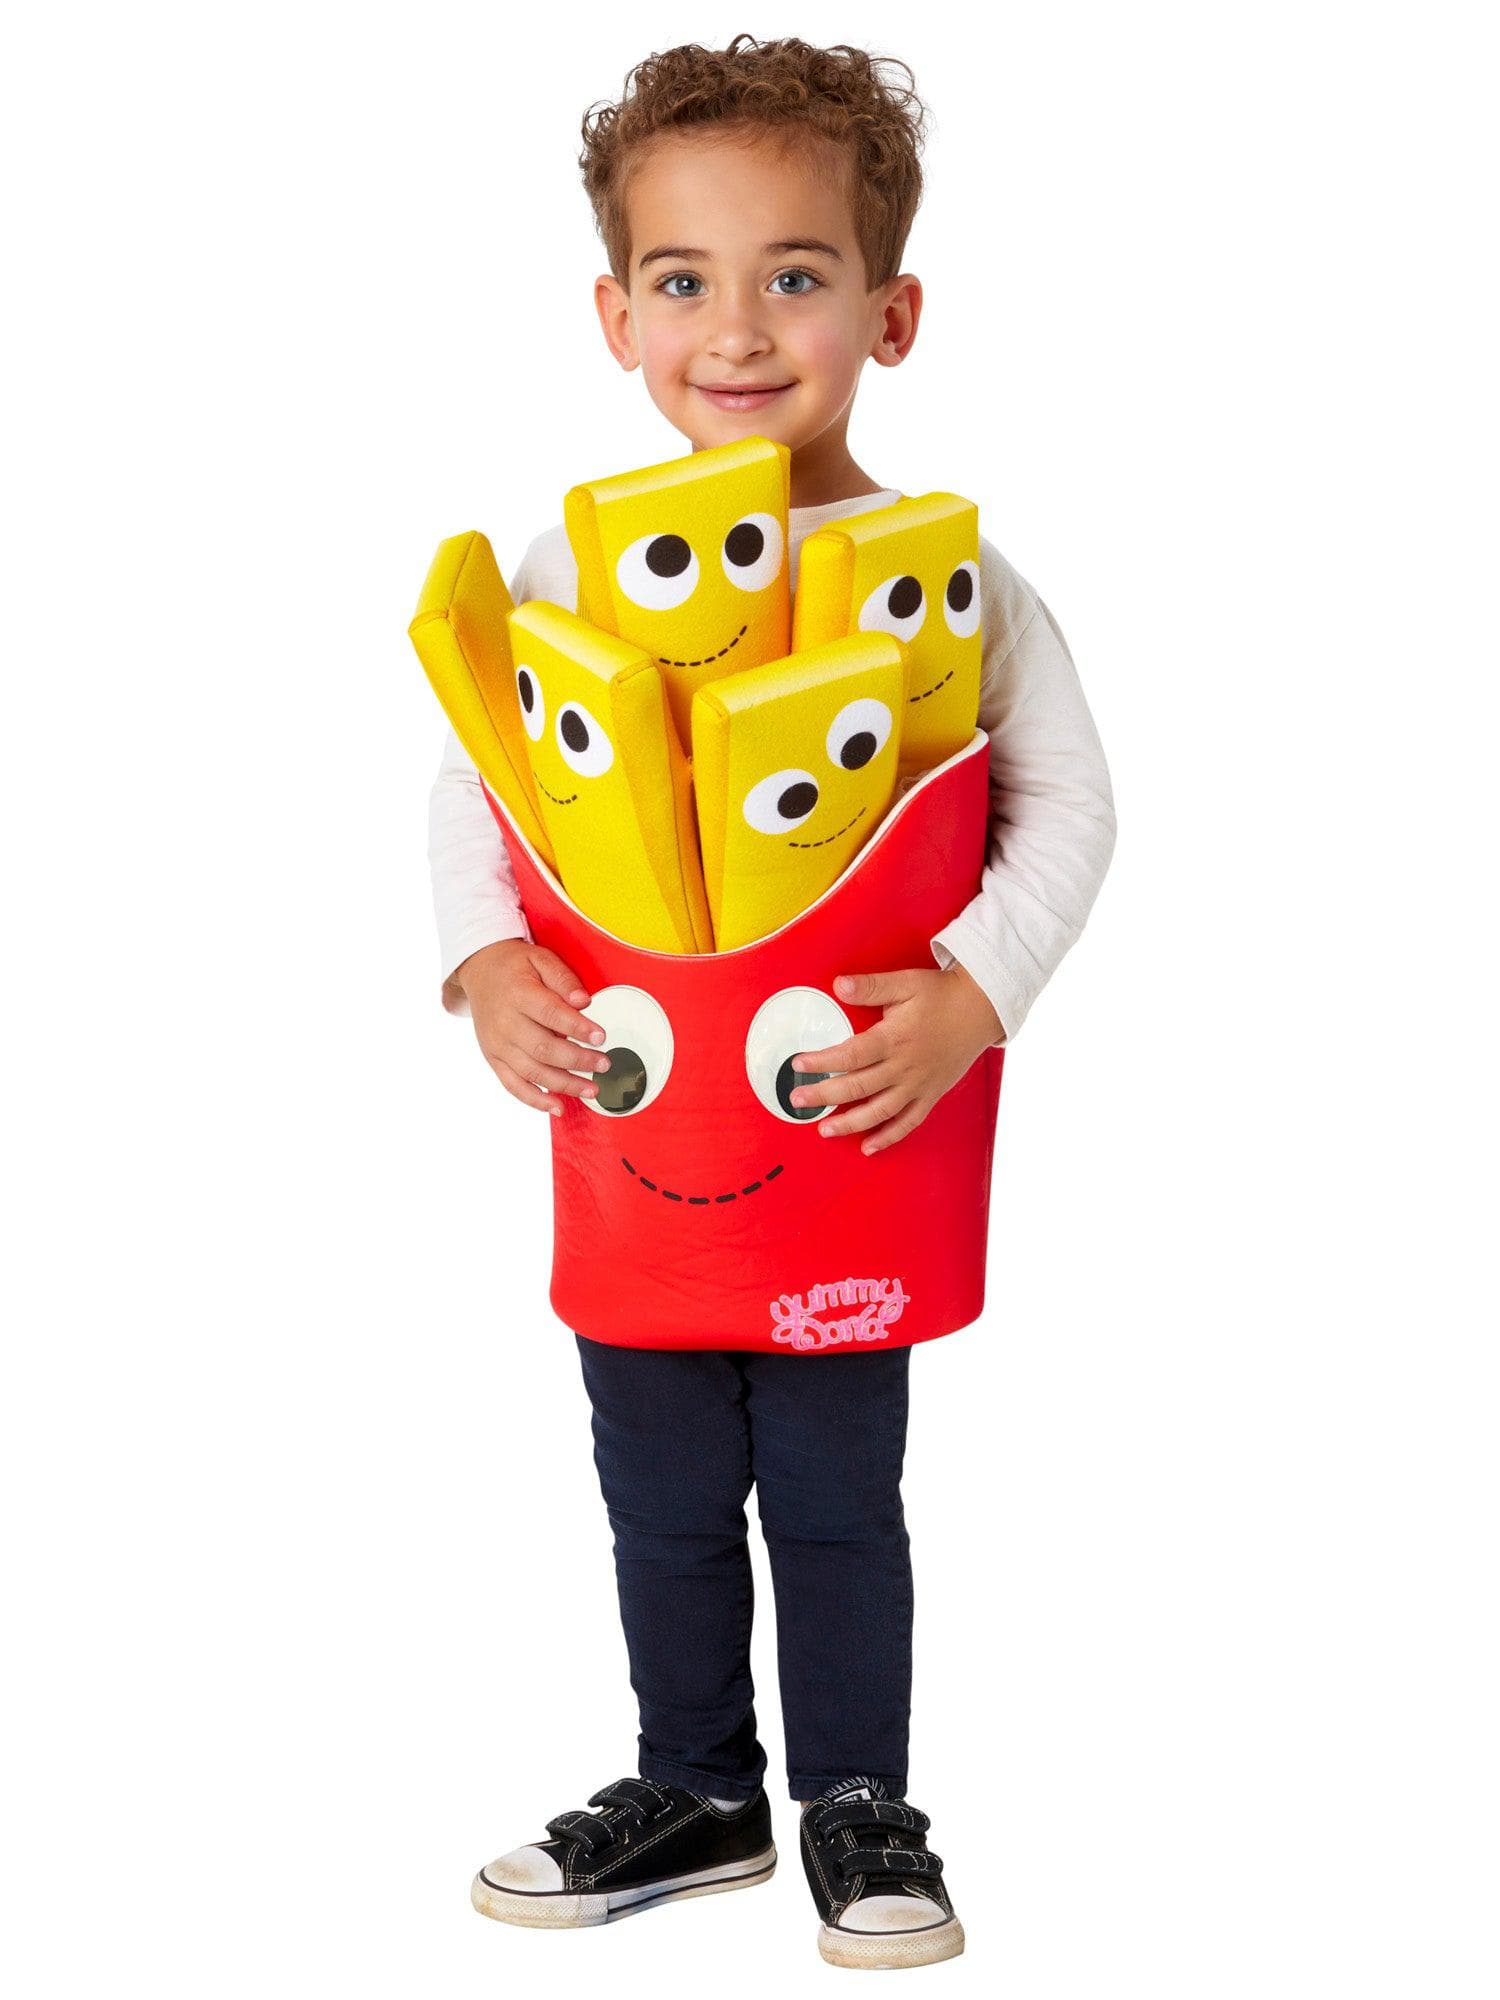 Yummy World Large French Fries Kids Costume by Kidrobot - costumes.com